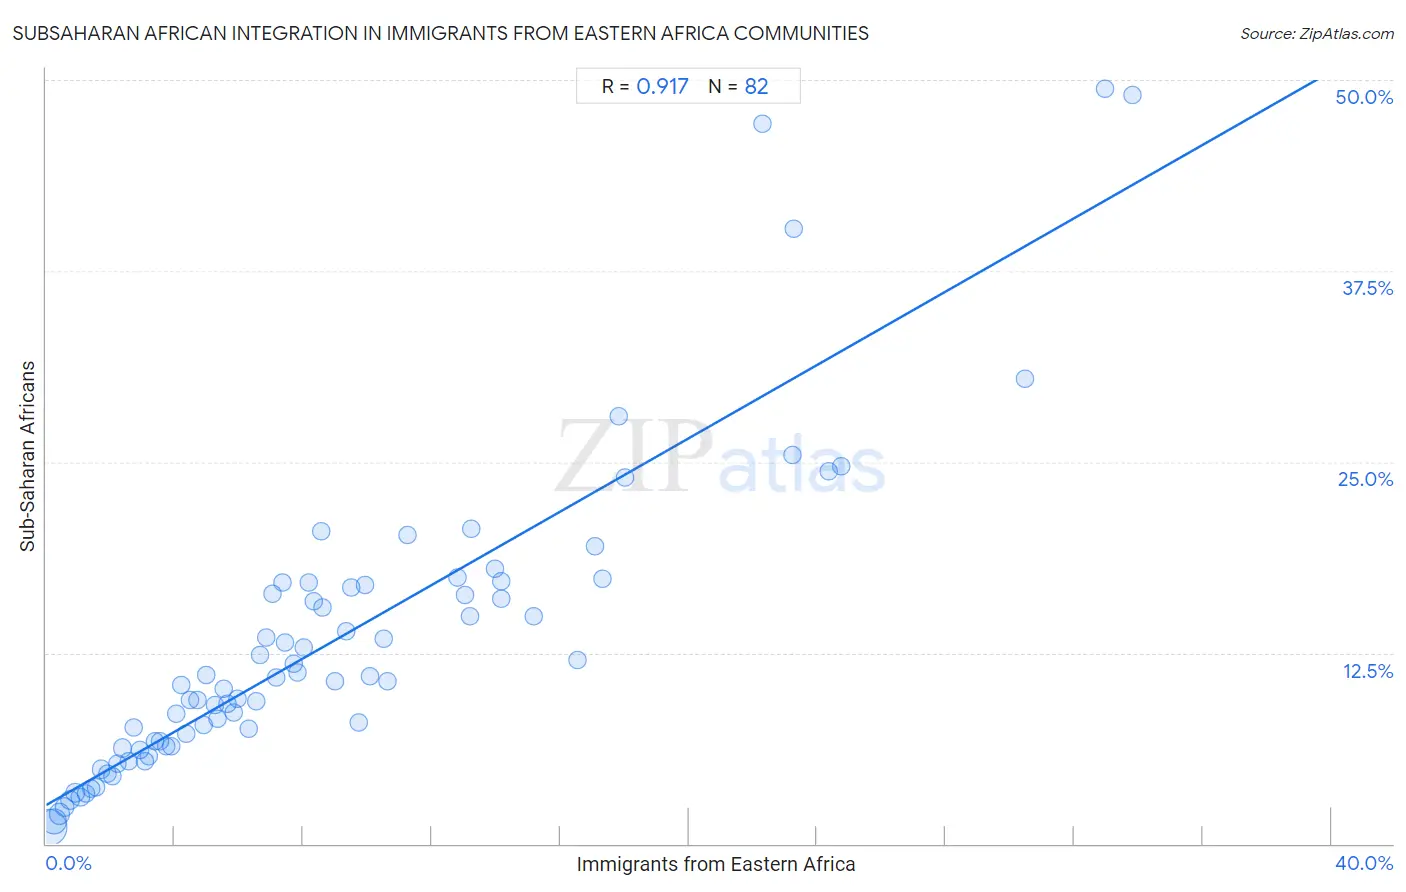 Immigrants from Eastern Africa Integration in Subsaharan African Communities